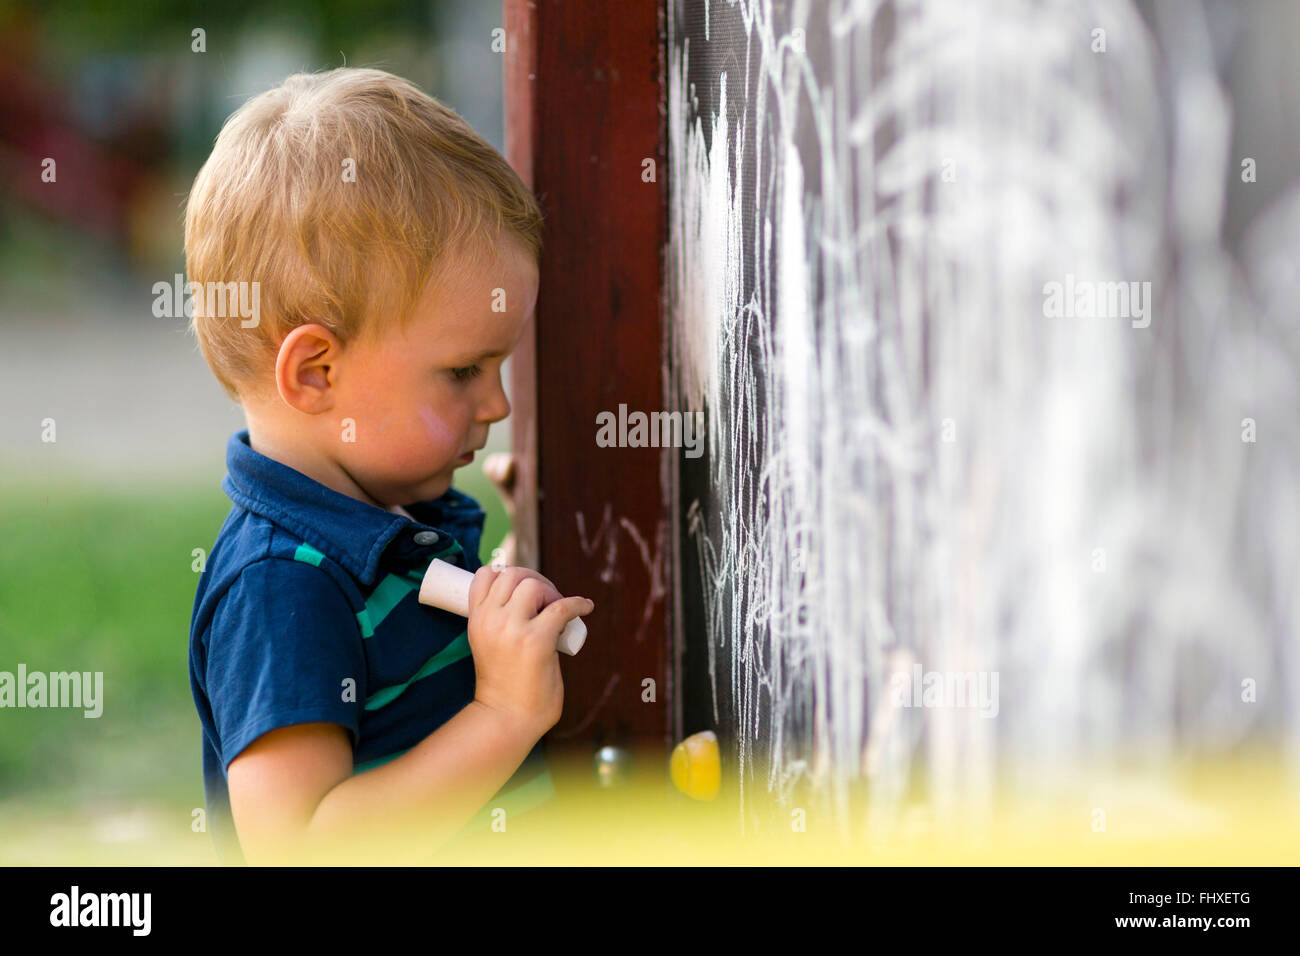 Creative cute toddler drawing with chalk outdoors on a drawing board Stock Photo